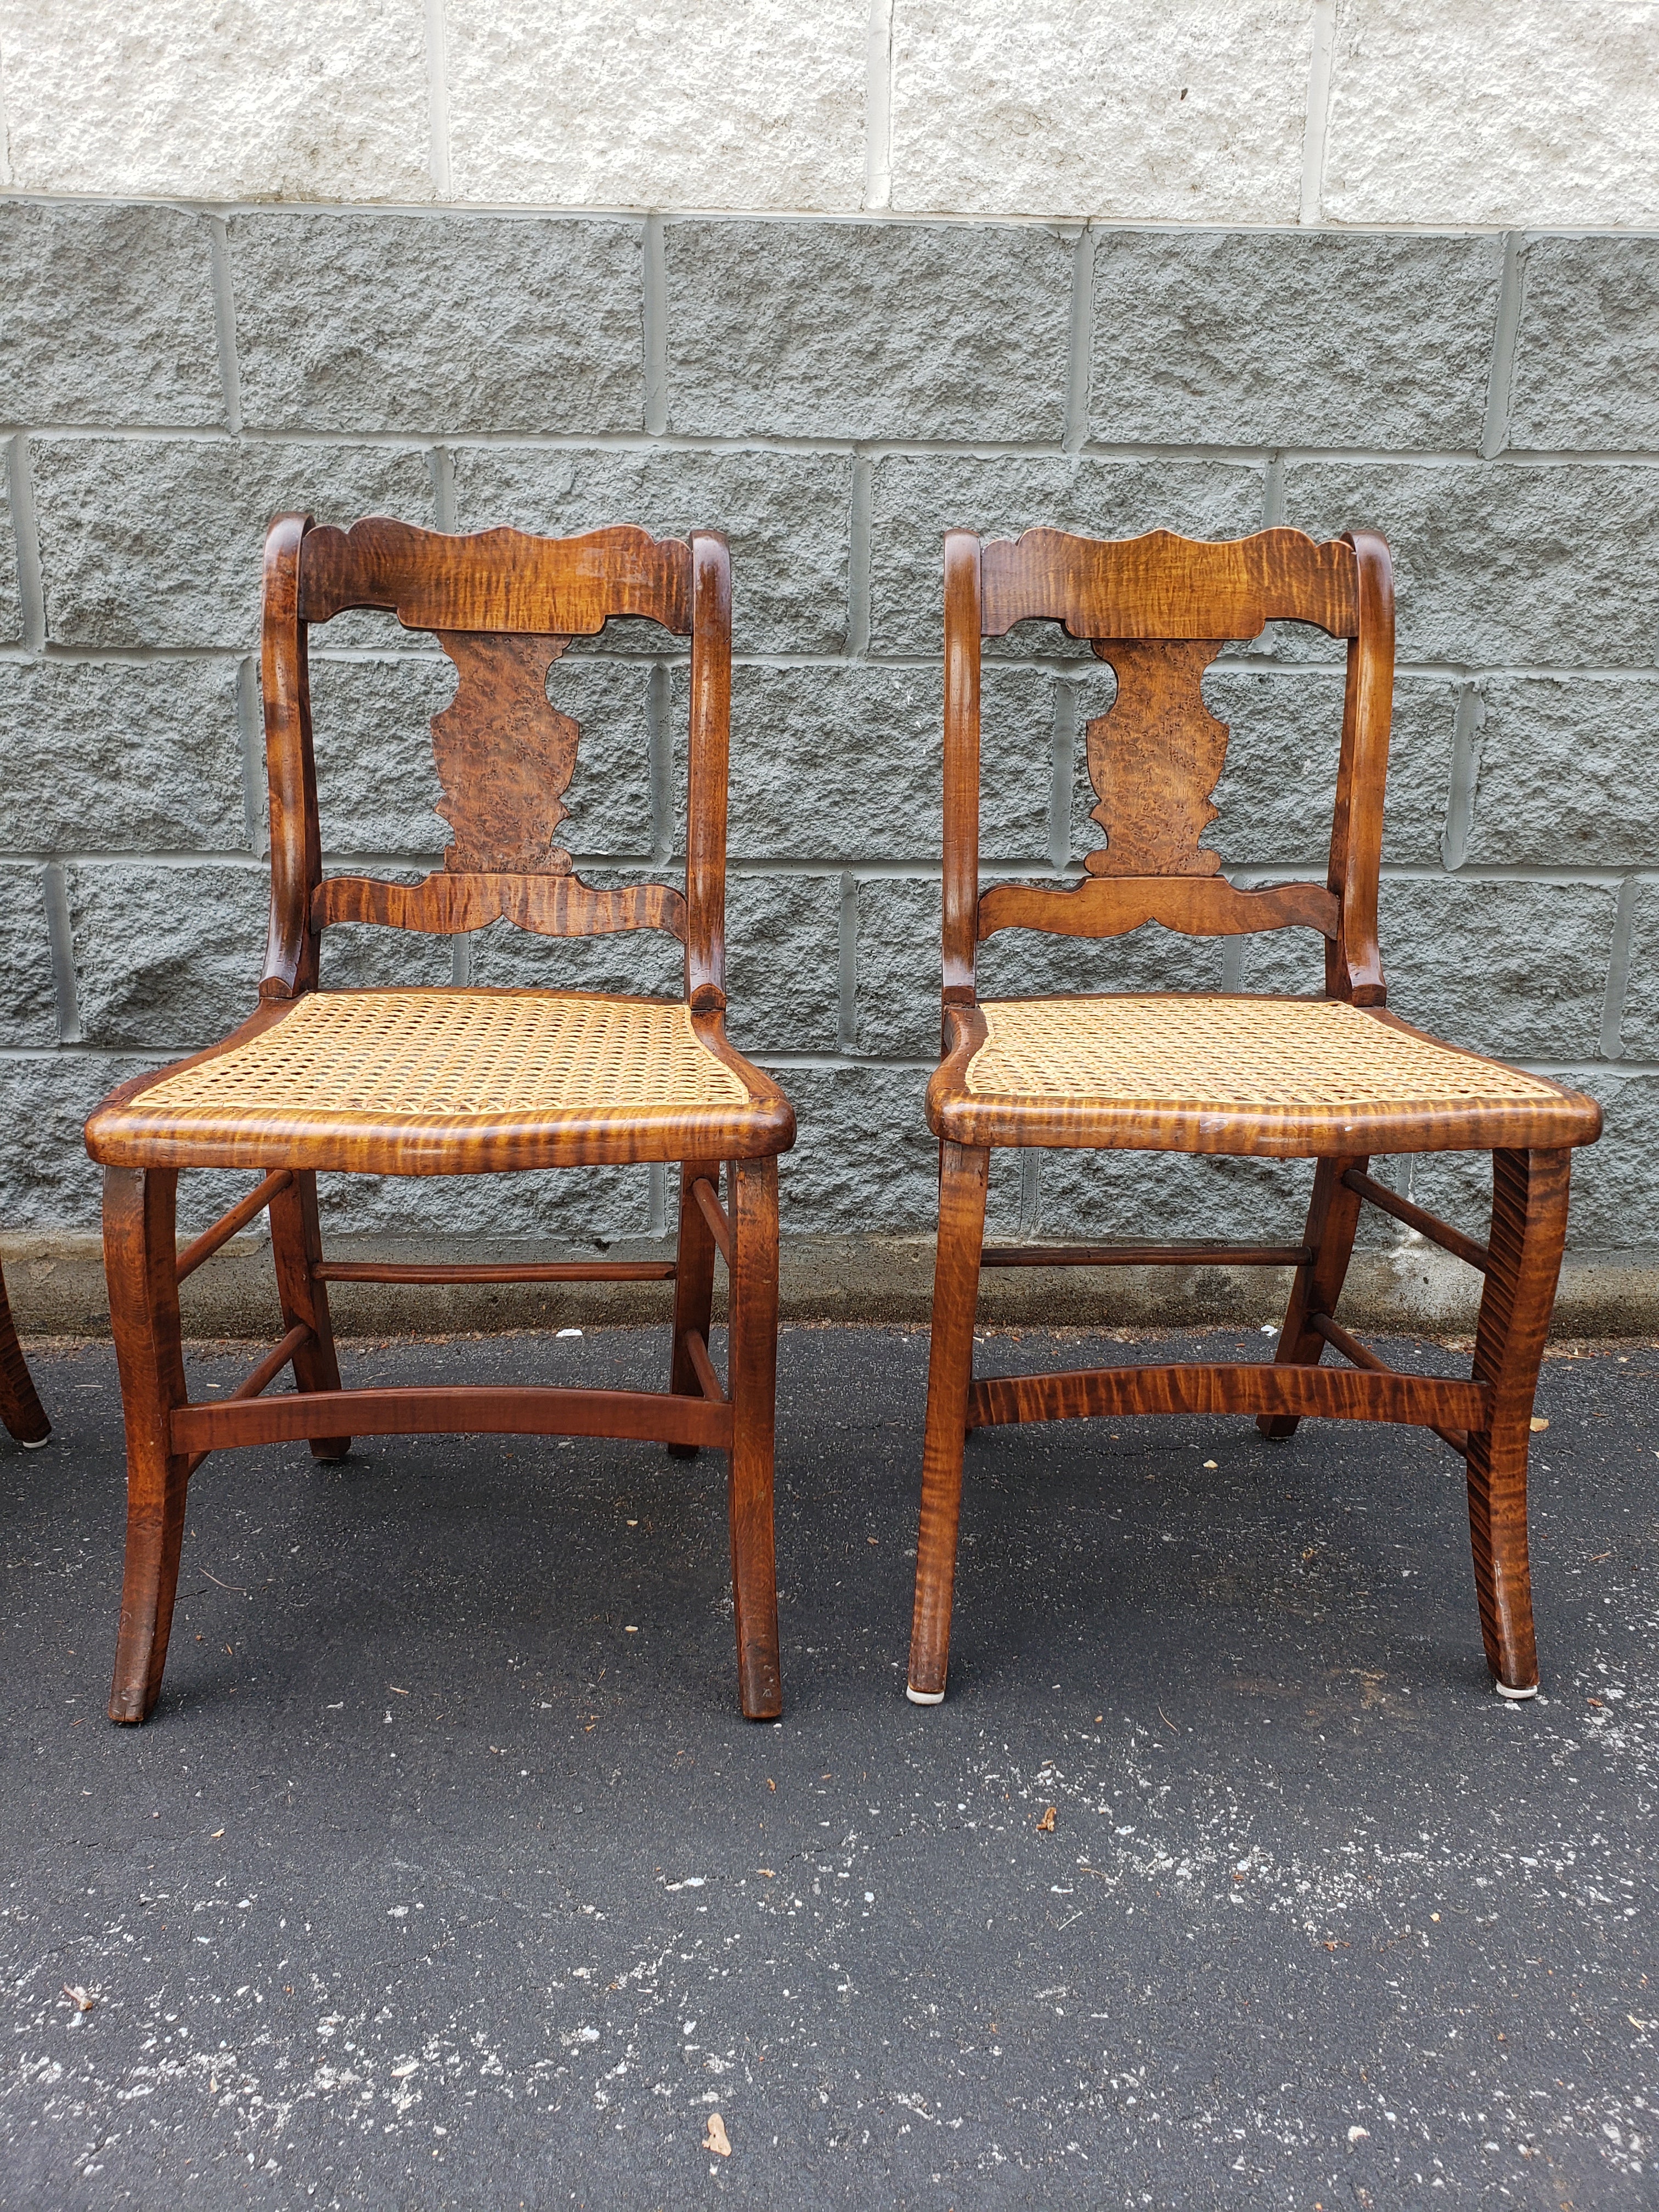 Caning Early American Tiger Wood and Cane Seat Chairs, Set of 4 For Sale